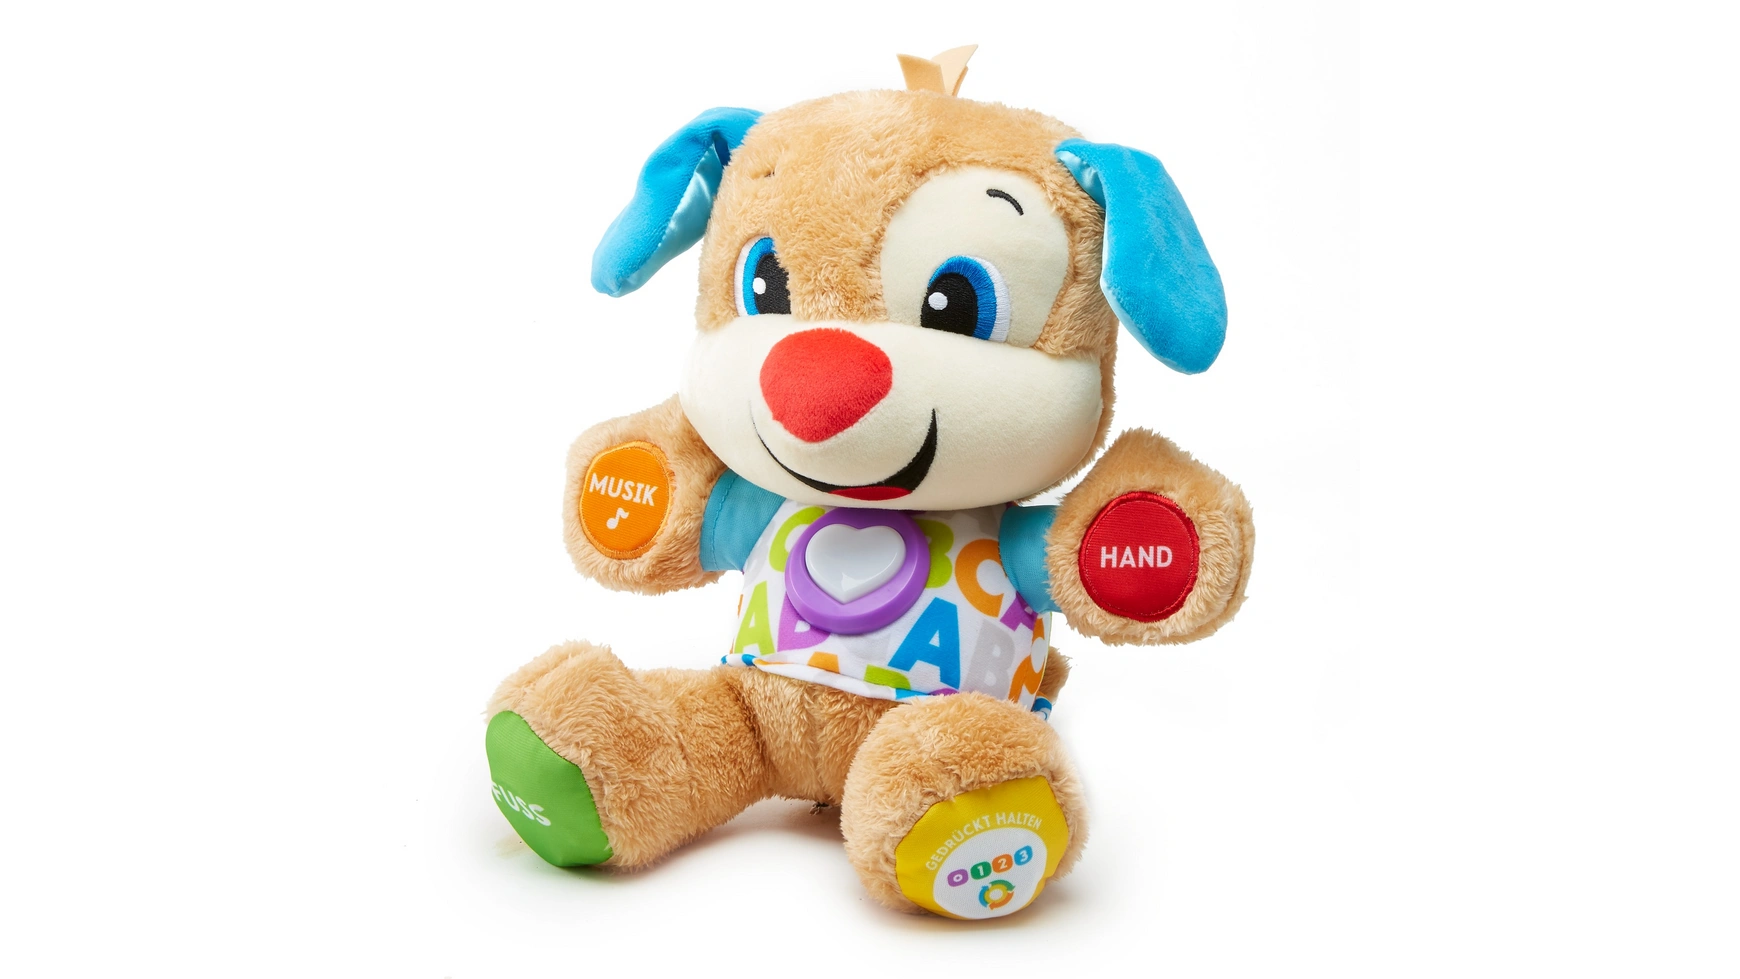 Fisher Price Learning Fun Puppy Детская игрушка с музыкой Мягкая игрушка Развивающая игрушка фото